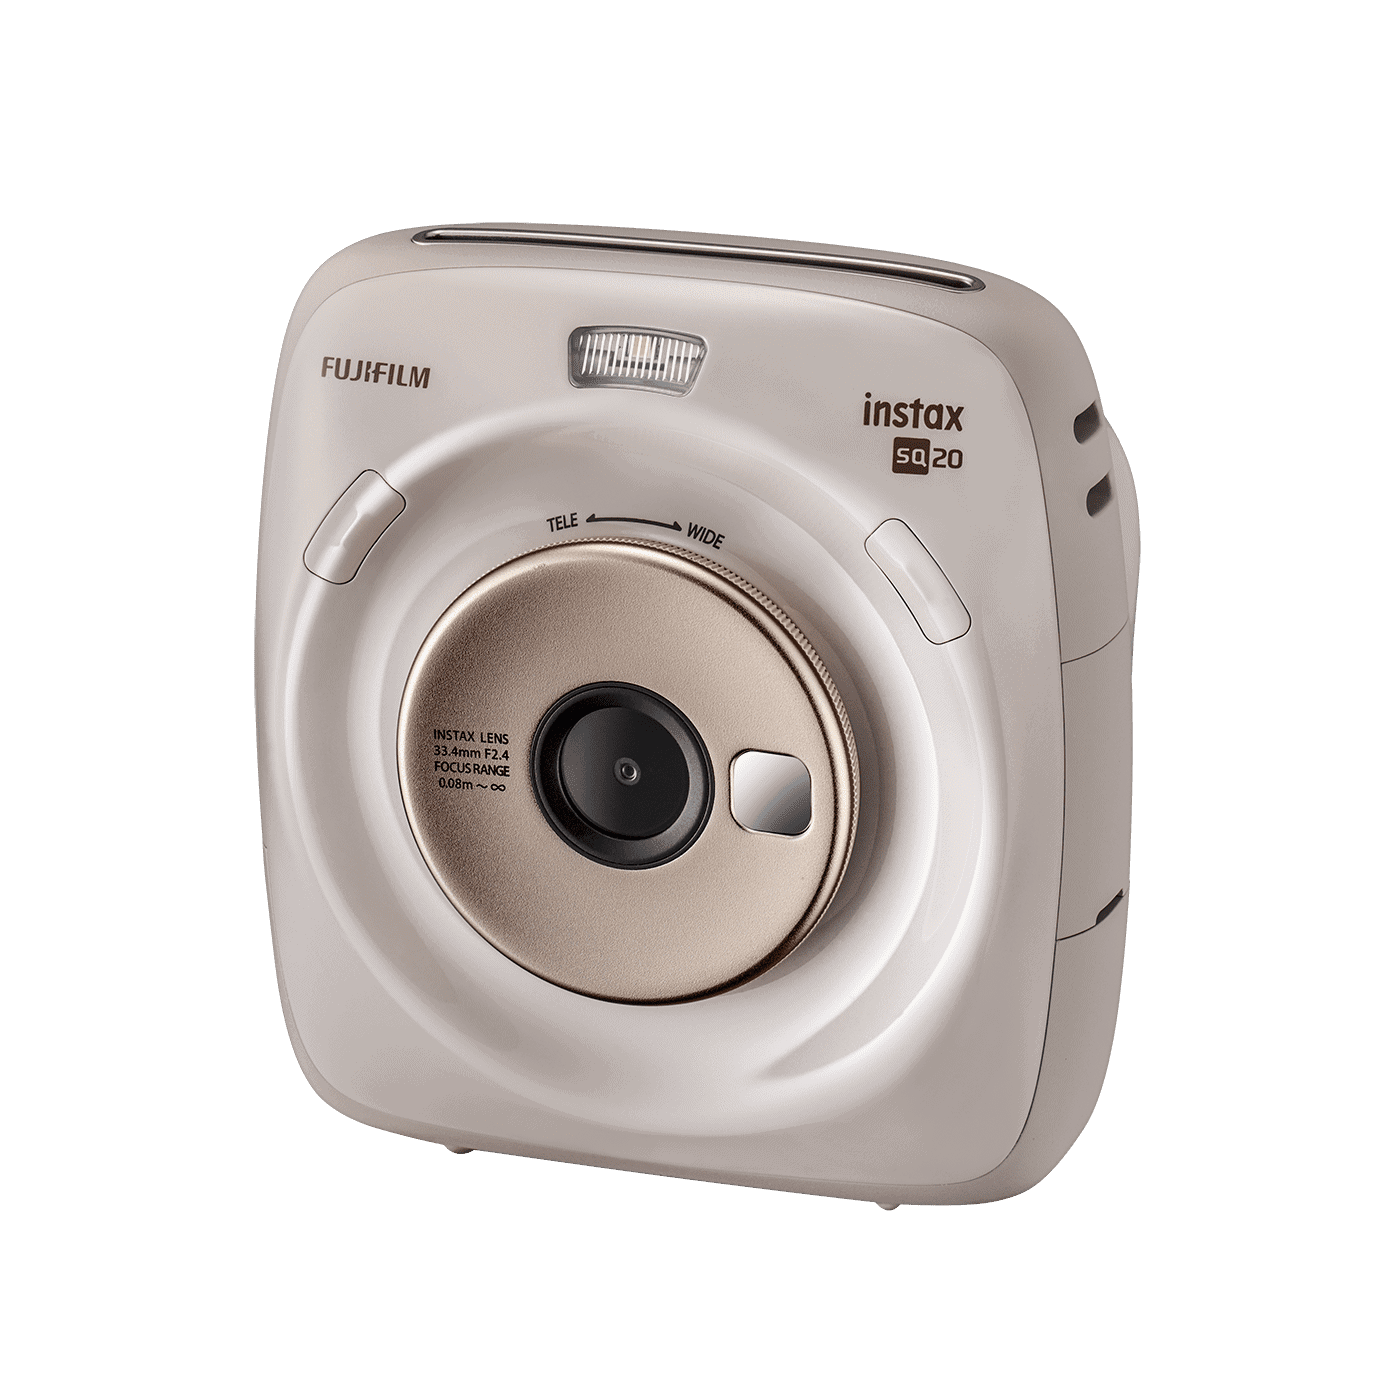 SQUARE SQ20 Instant Camera | instax by Fujifilm Photography